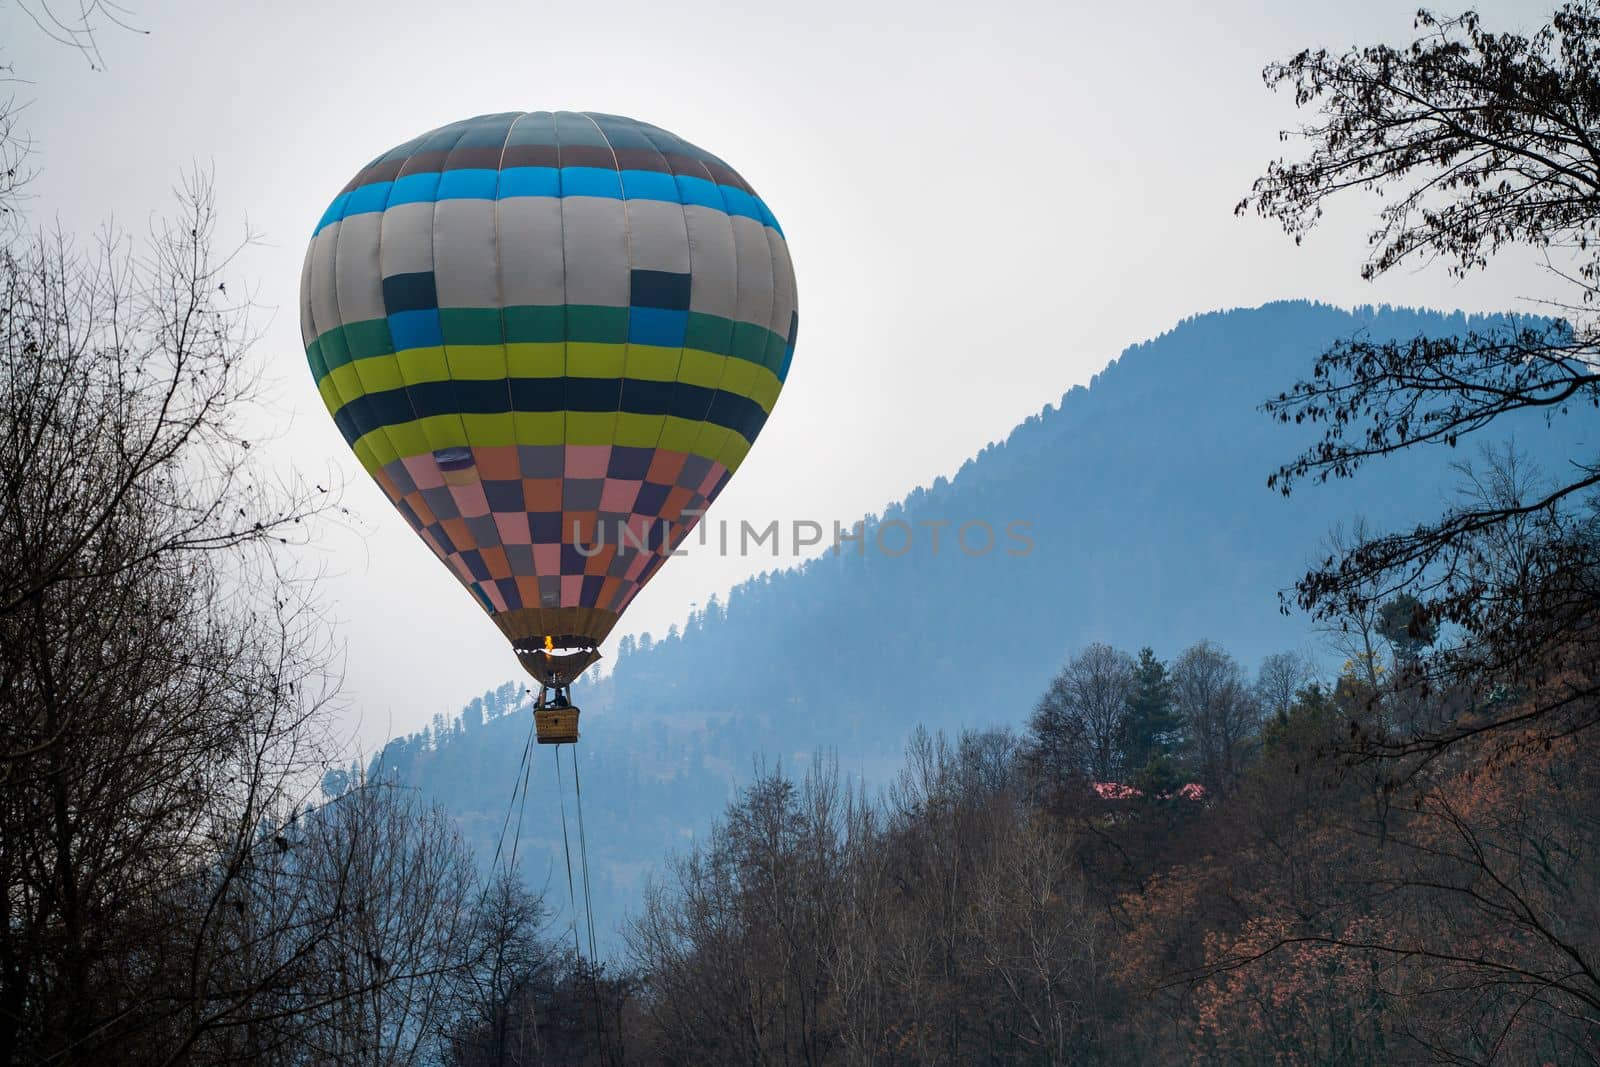 Hot air balloon with fire heating air in wicker basket with himalaya mountains in background showing this adventure in kullu manali valley by Shalinimathur